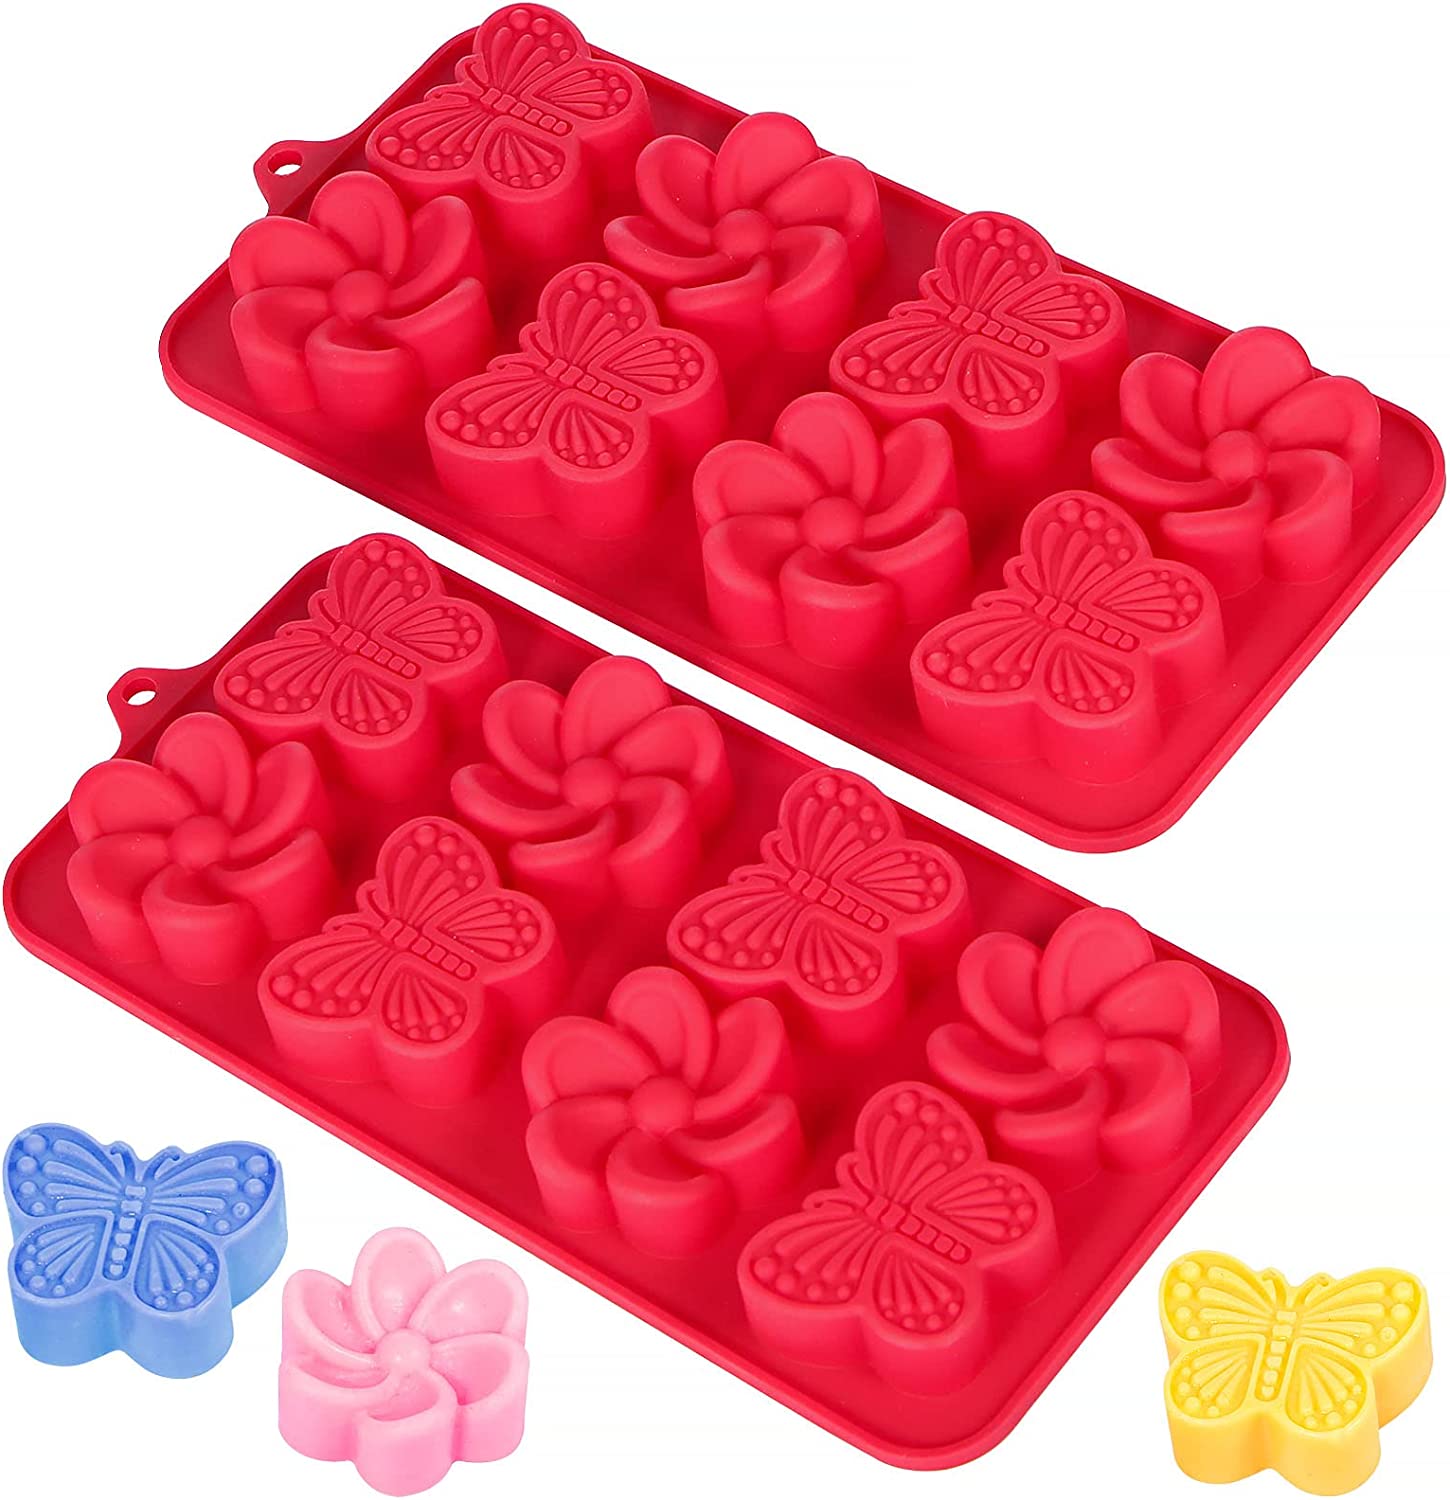 Flowers Silicone Chocolate Mold